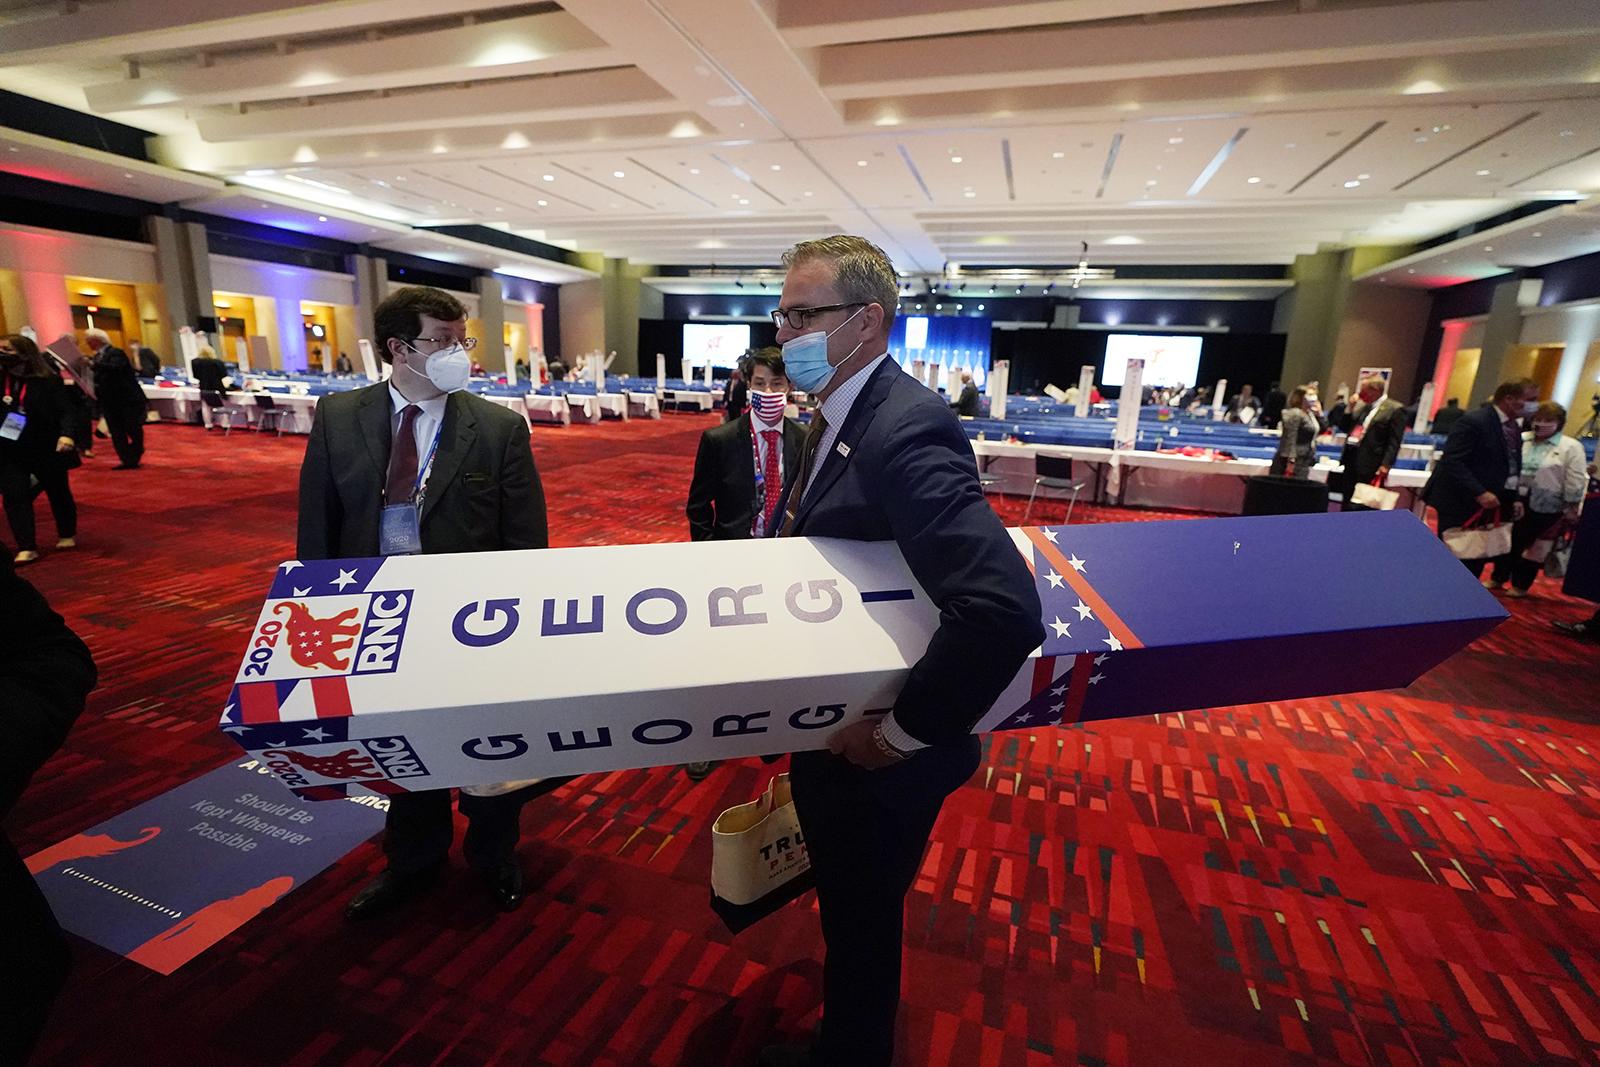 A member of the Georgia delegation walks out with their delegation placard after the vote on the first day of the Republican National Convention, Monday, August 24, in Charlotte.